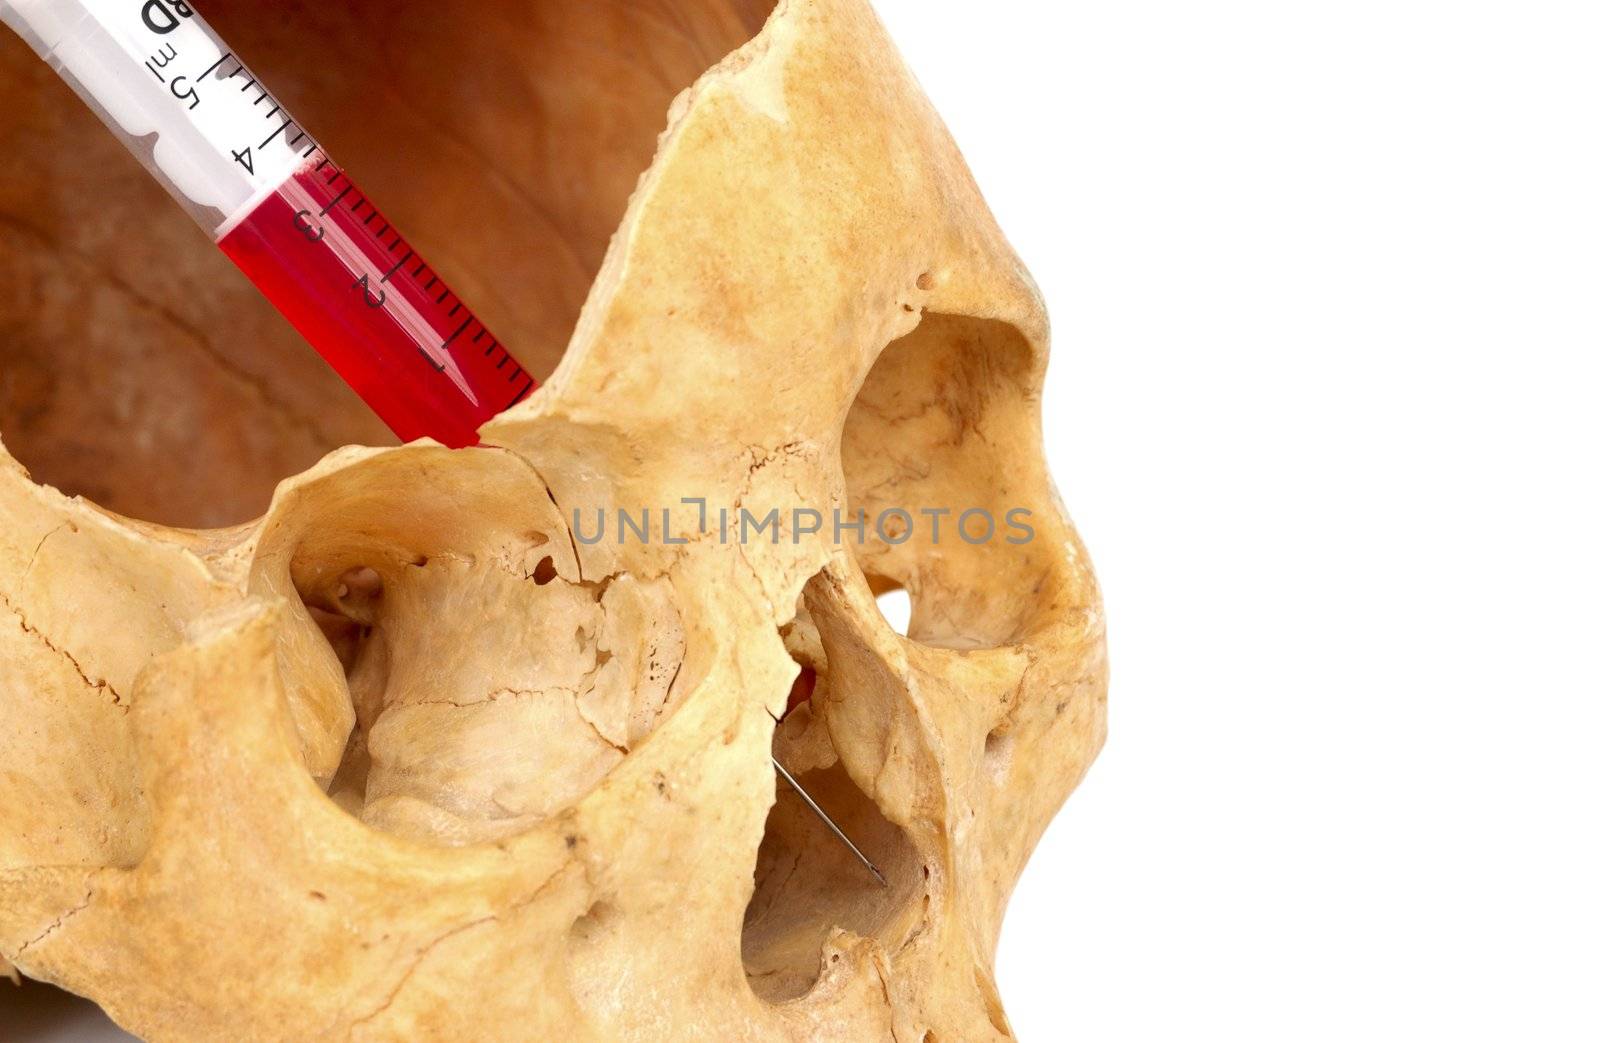 Old broken skull against white background with syringe with red liquid